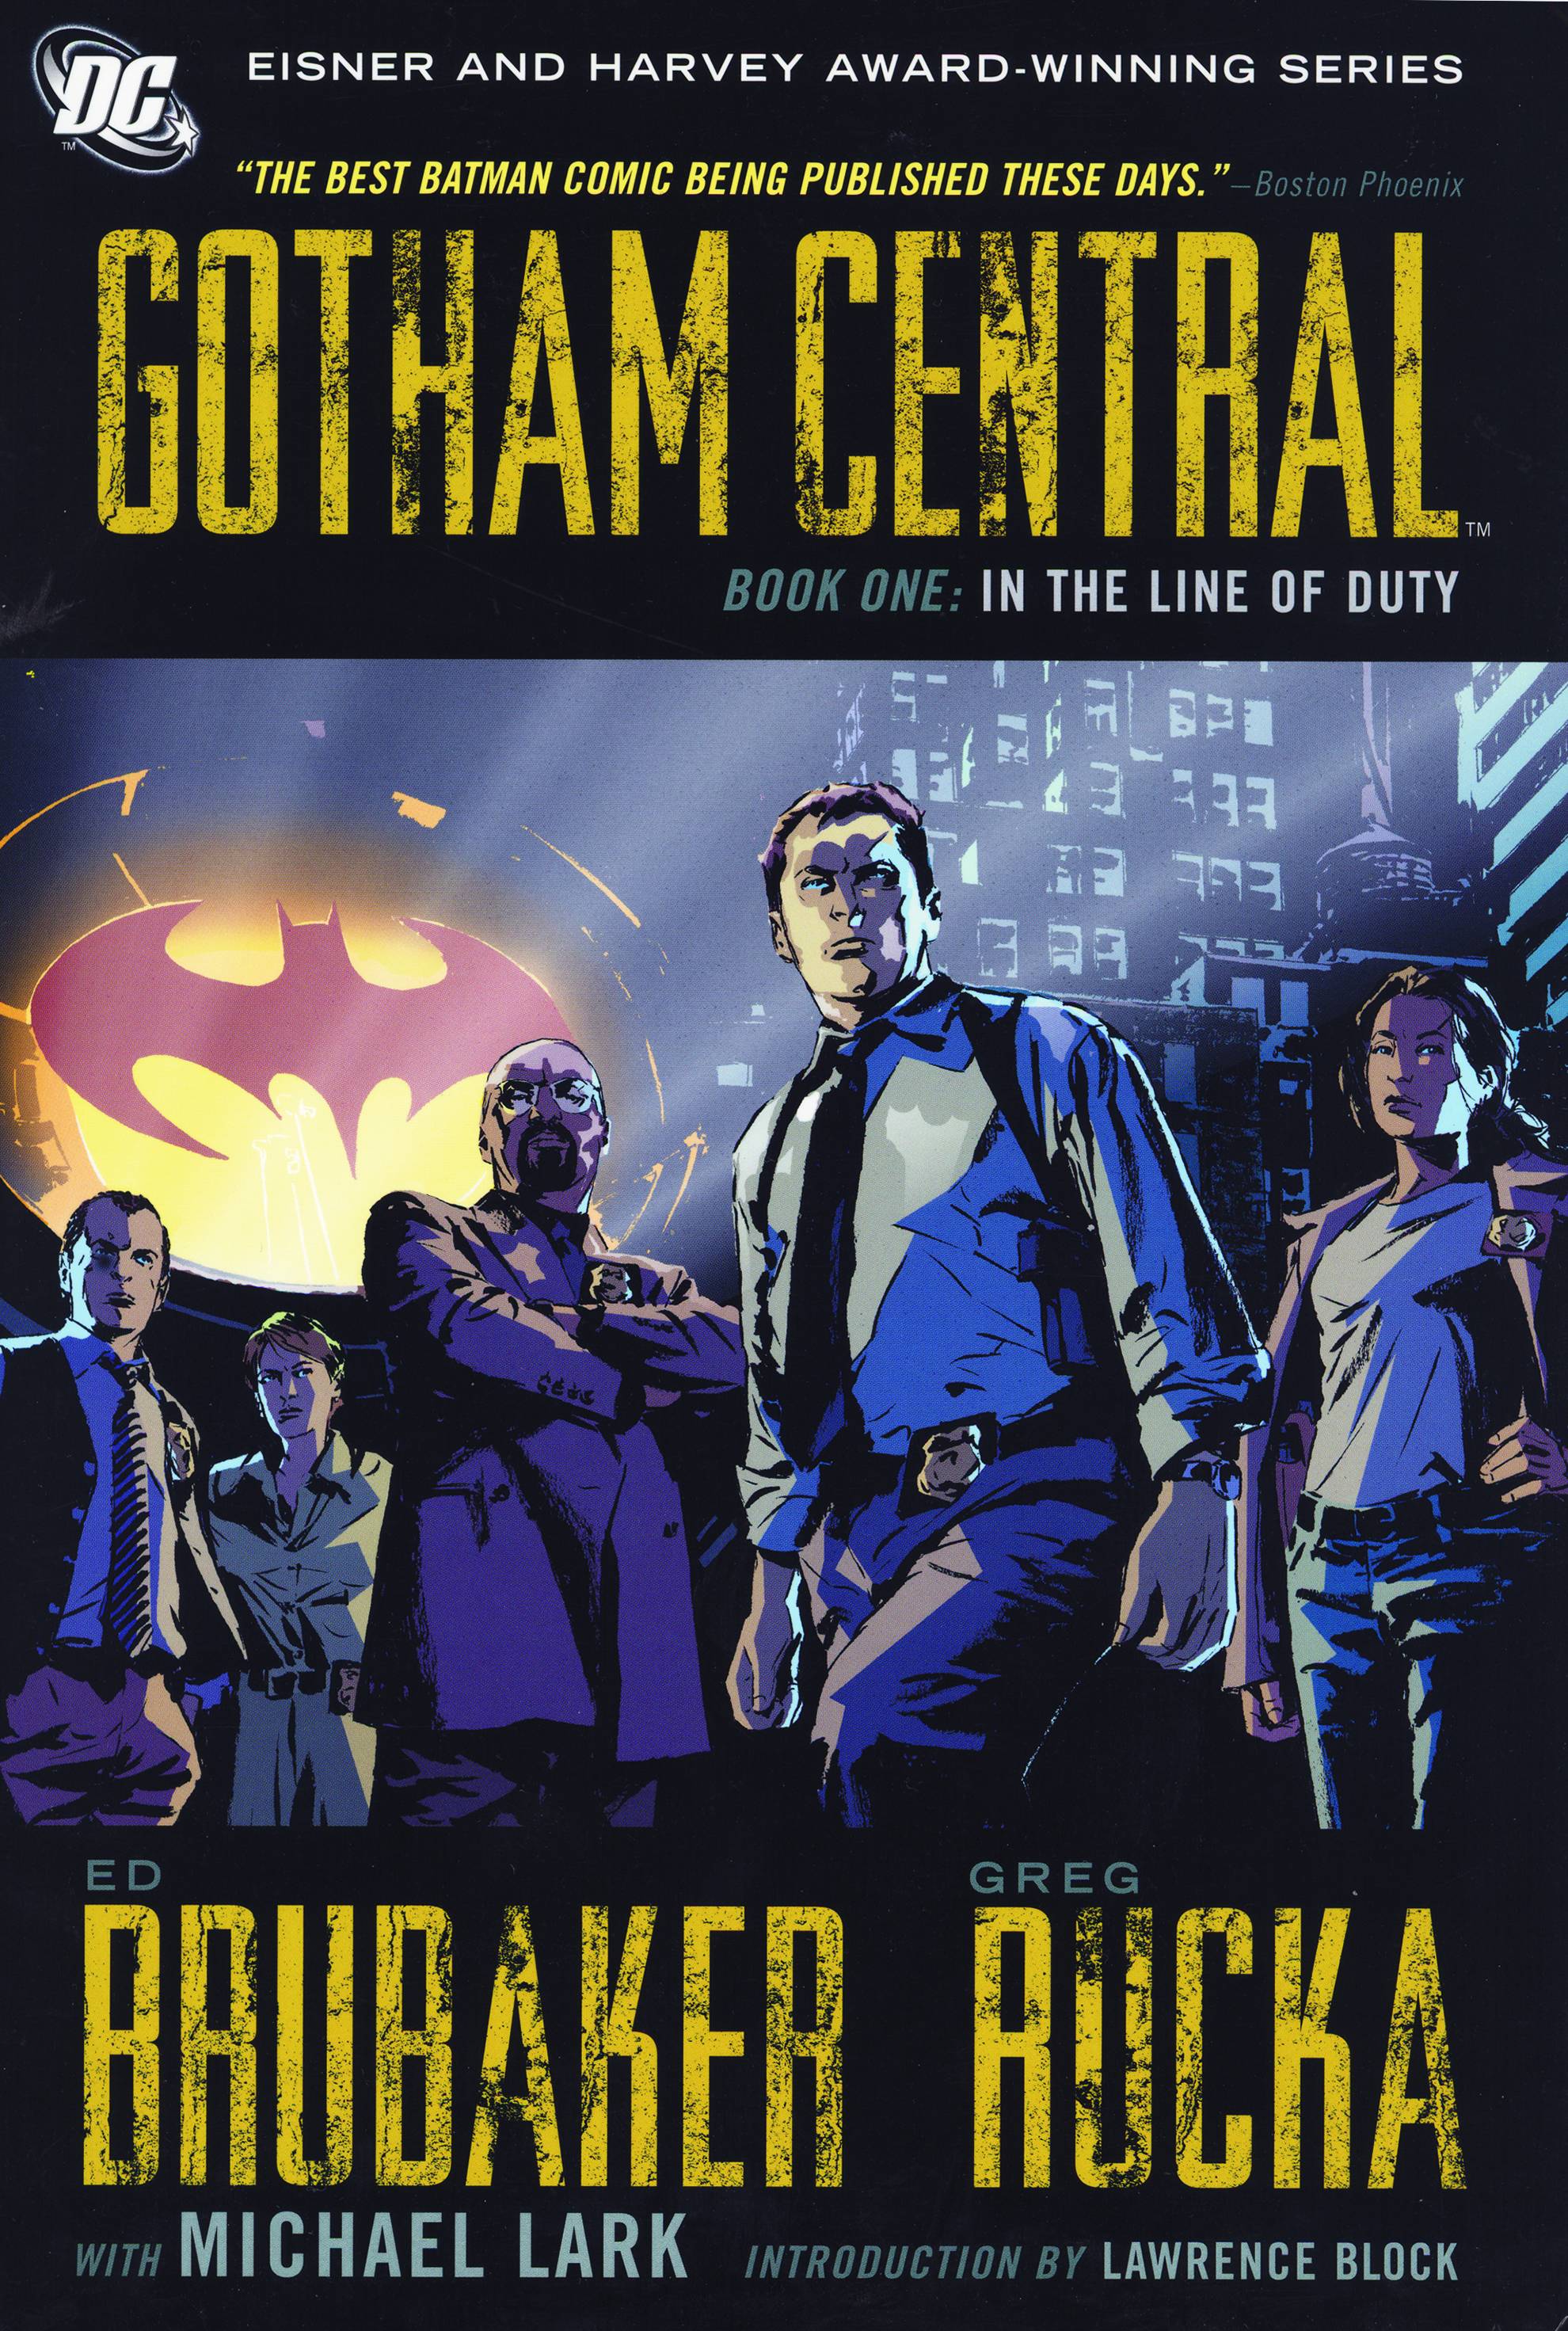 Gotham Central Graphic Novel Book 1 In The Line of Duty